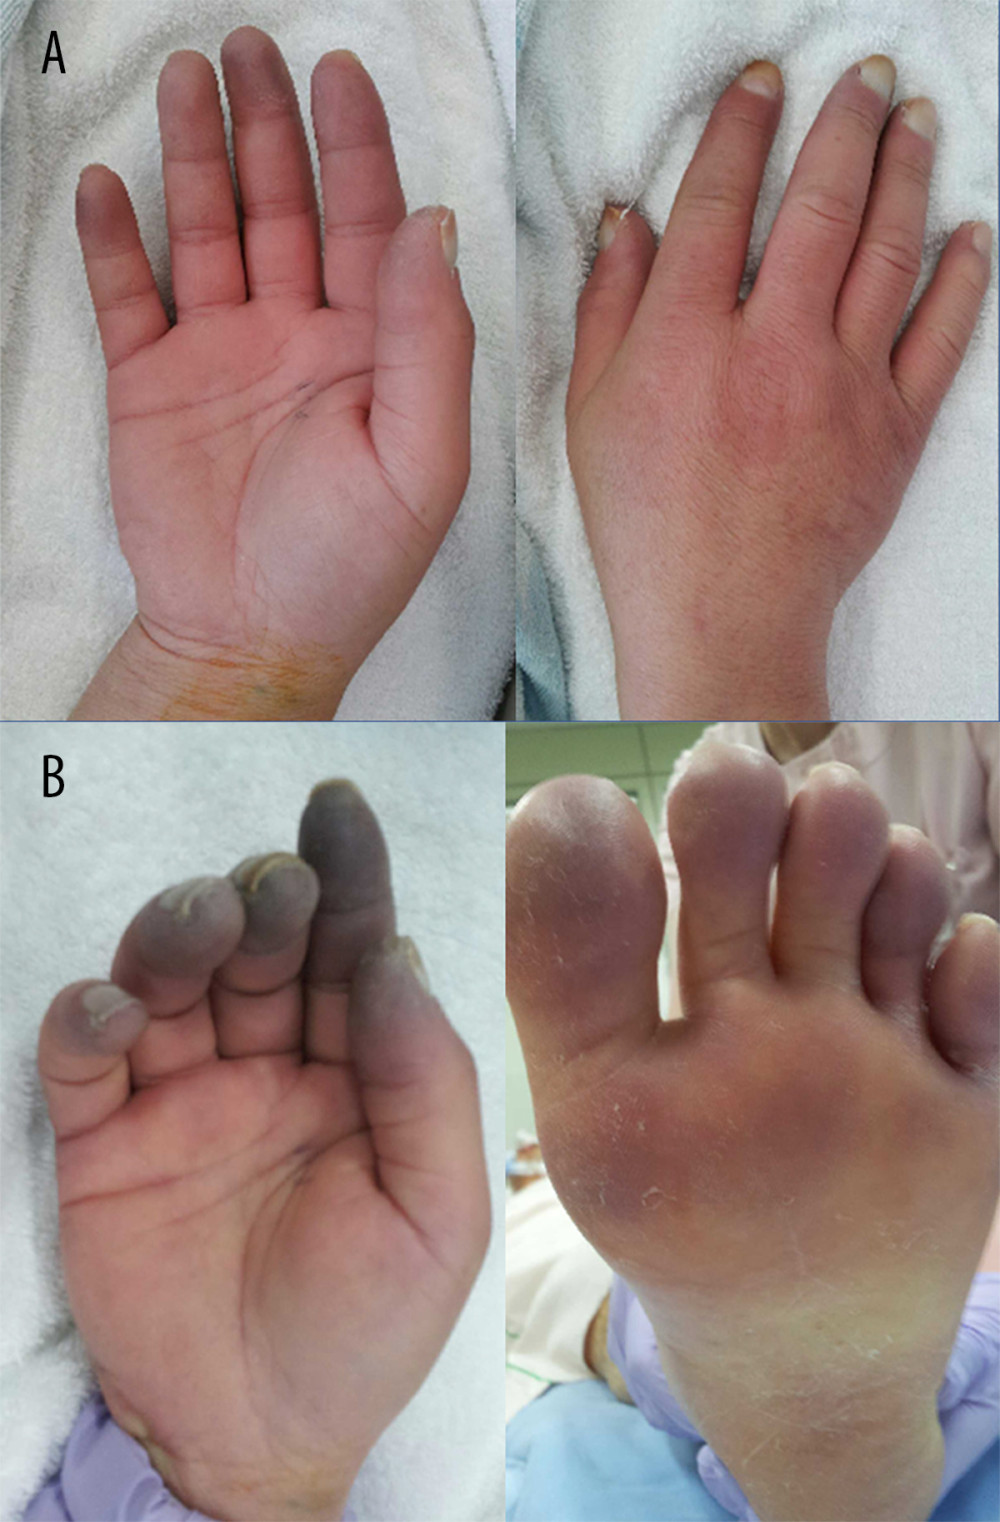 The patient’s hand and sole at (A) admission and (B) on day 12. (A) The patient’s hand exhibited purpura that extended to the tips as well as skin sclerosis on fingertips. (B) The ischemic lesion on his fingers were exacerbated and purpura on his sole revealed.